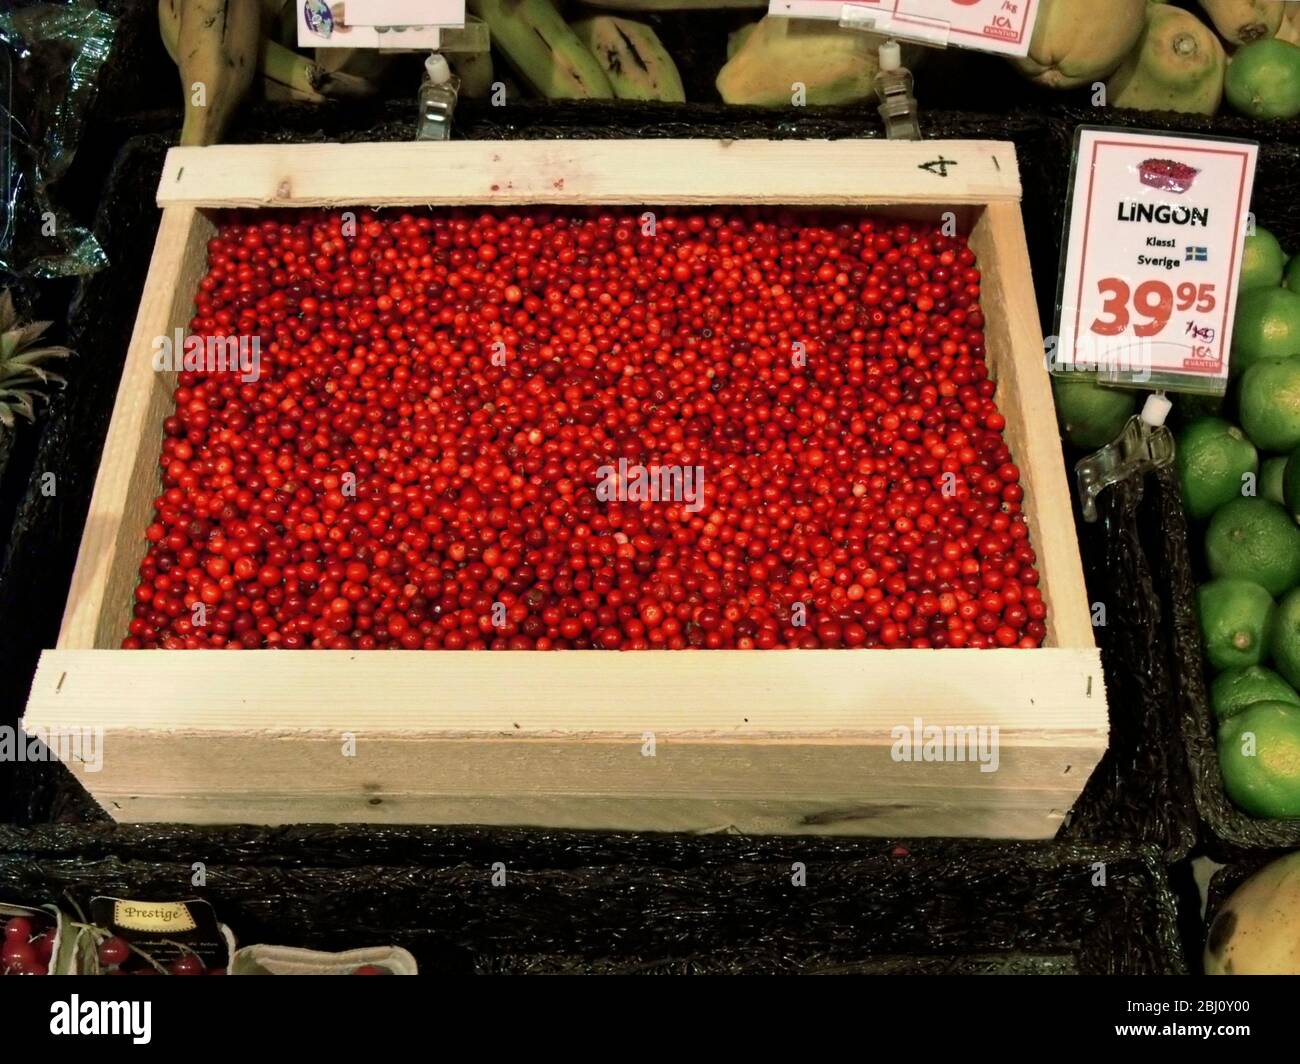 Tray of lingonberries for sale in Swedish supermarket. Like a wild cranberry these grow profusely in the Swedish forests and are used to make a tart j Stock Photo